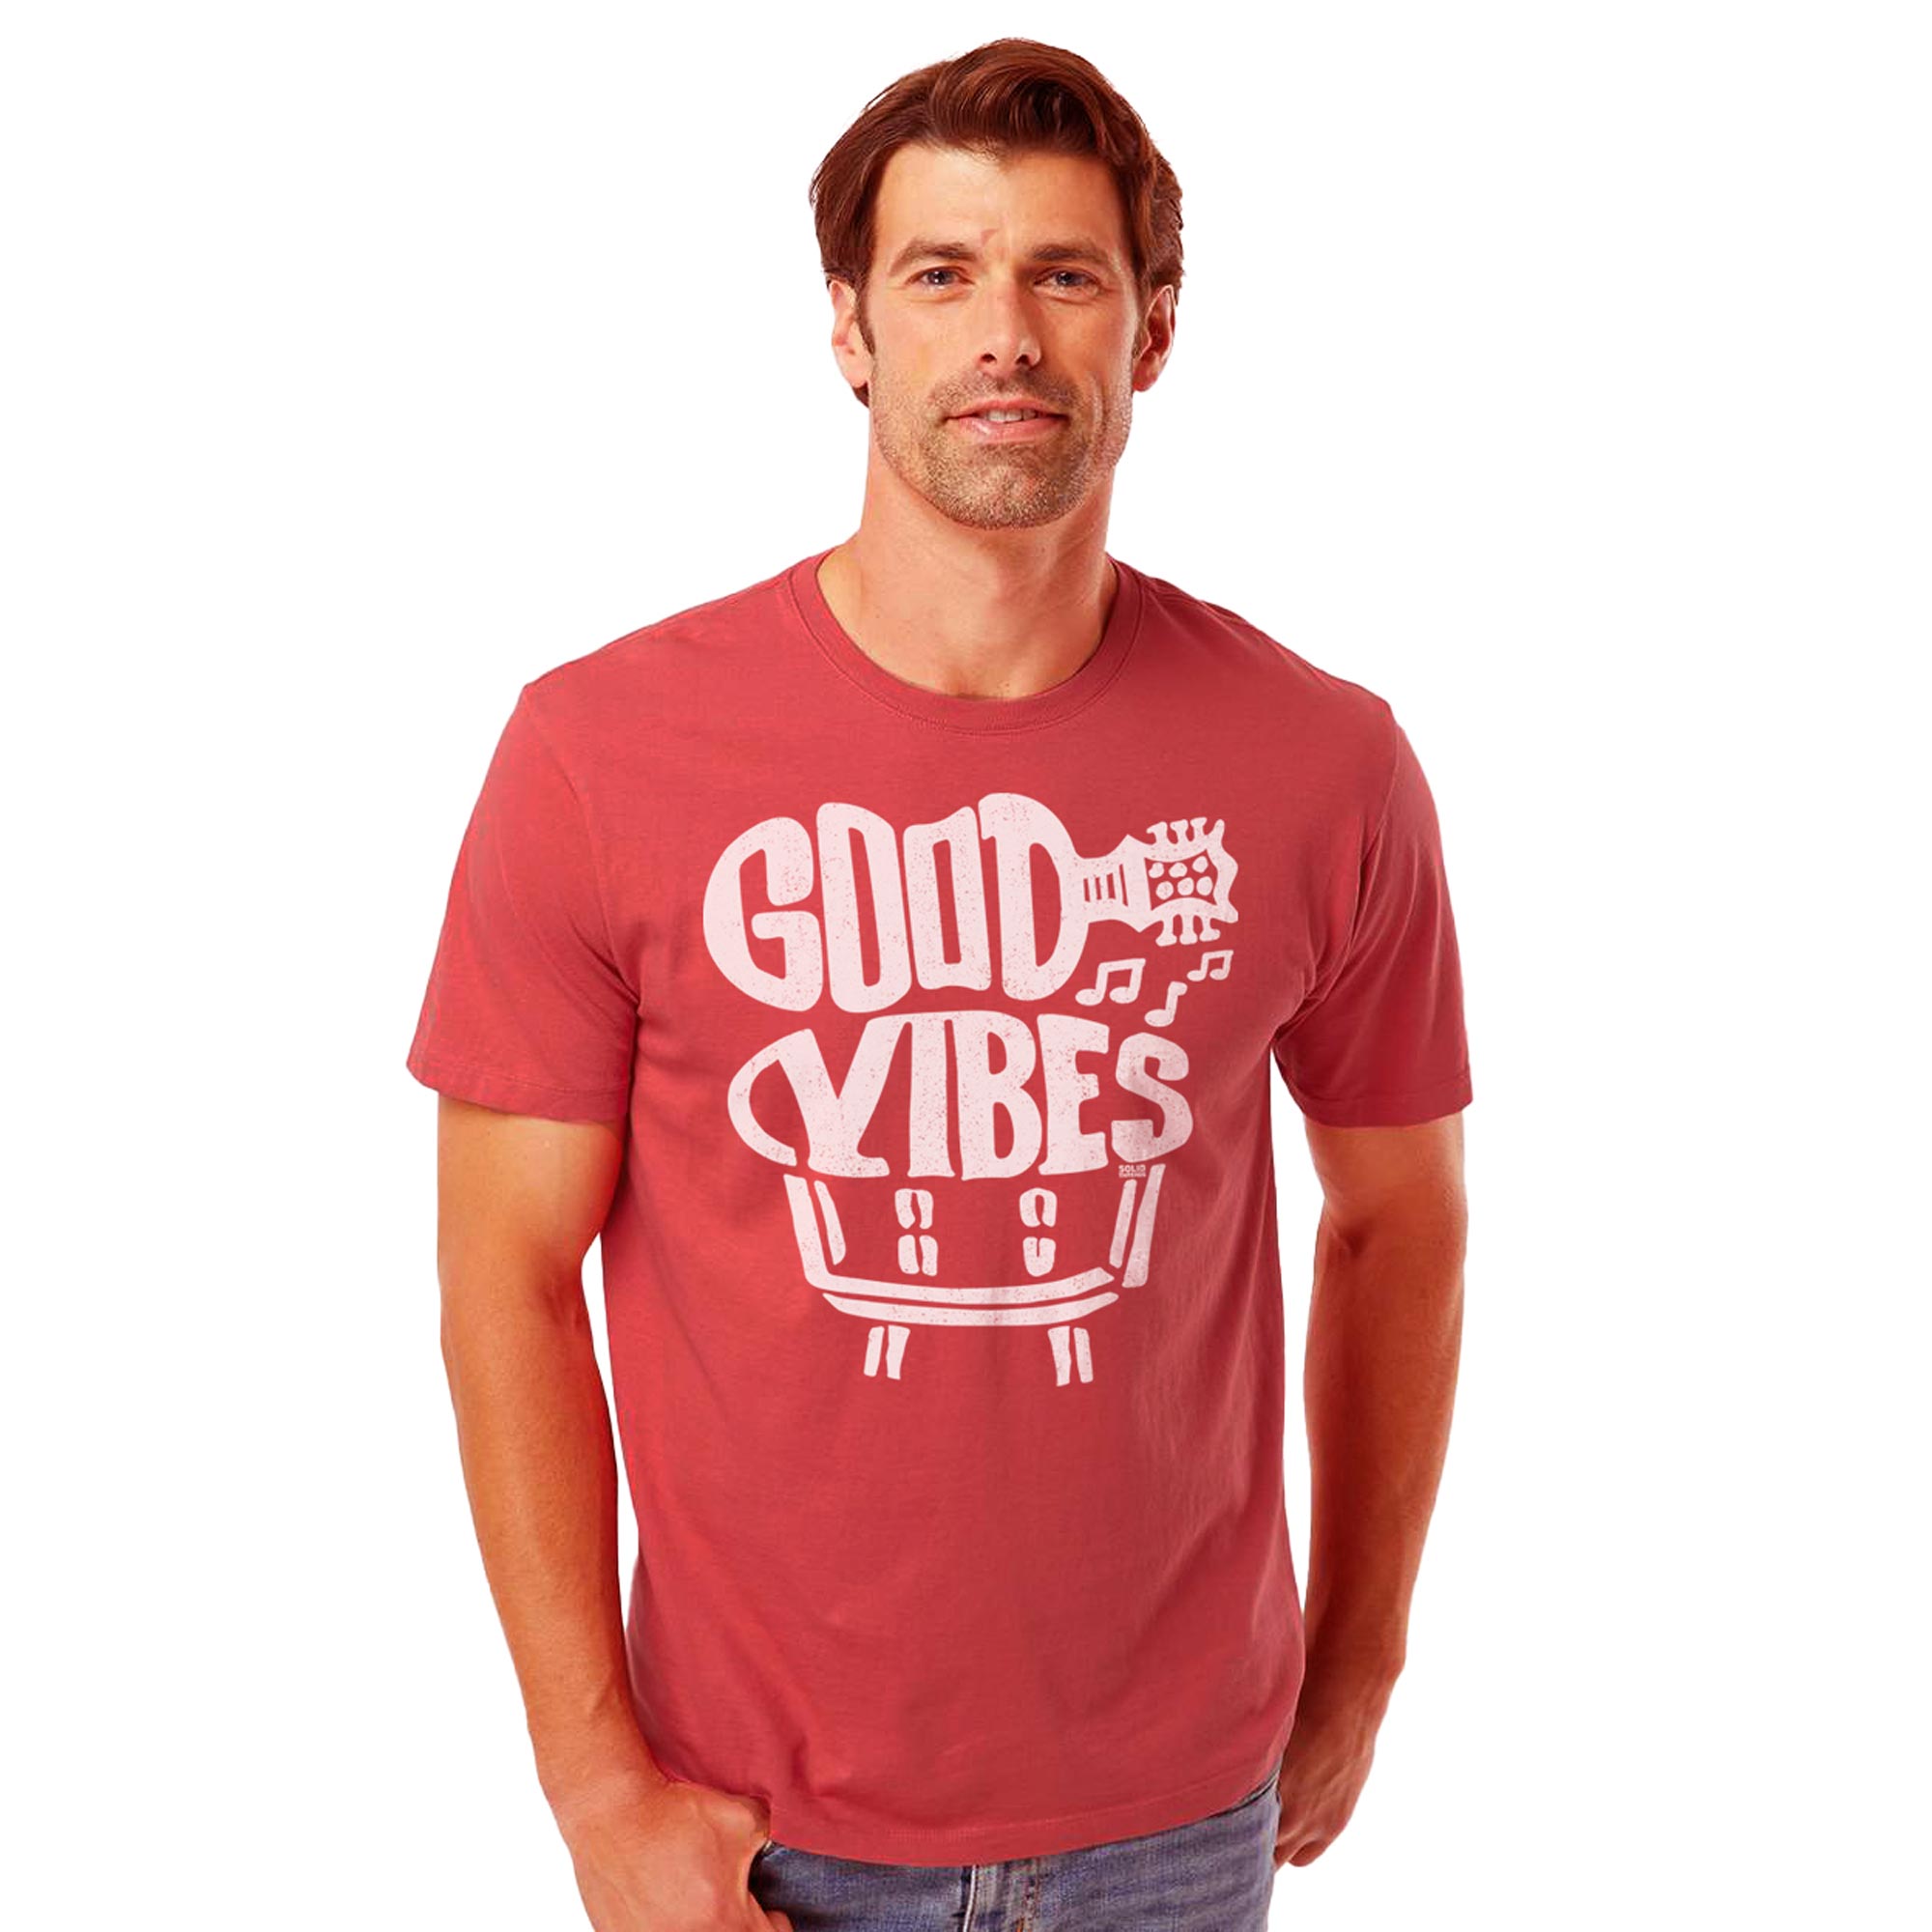 Good Vibes Cool Organic Cotton T-shirt | Vintage Music Festival  Tee On Model | Solid Threads